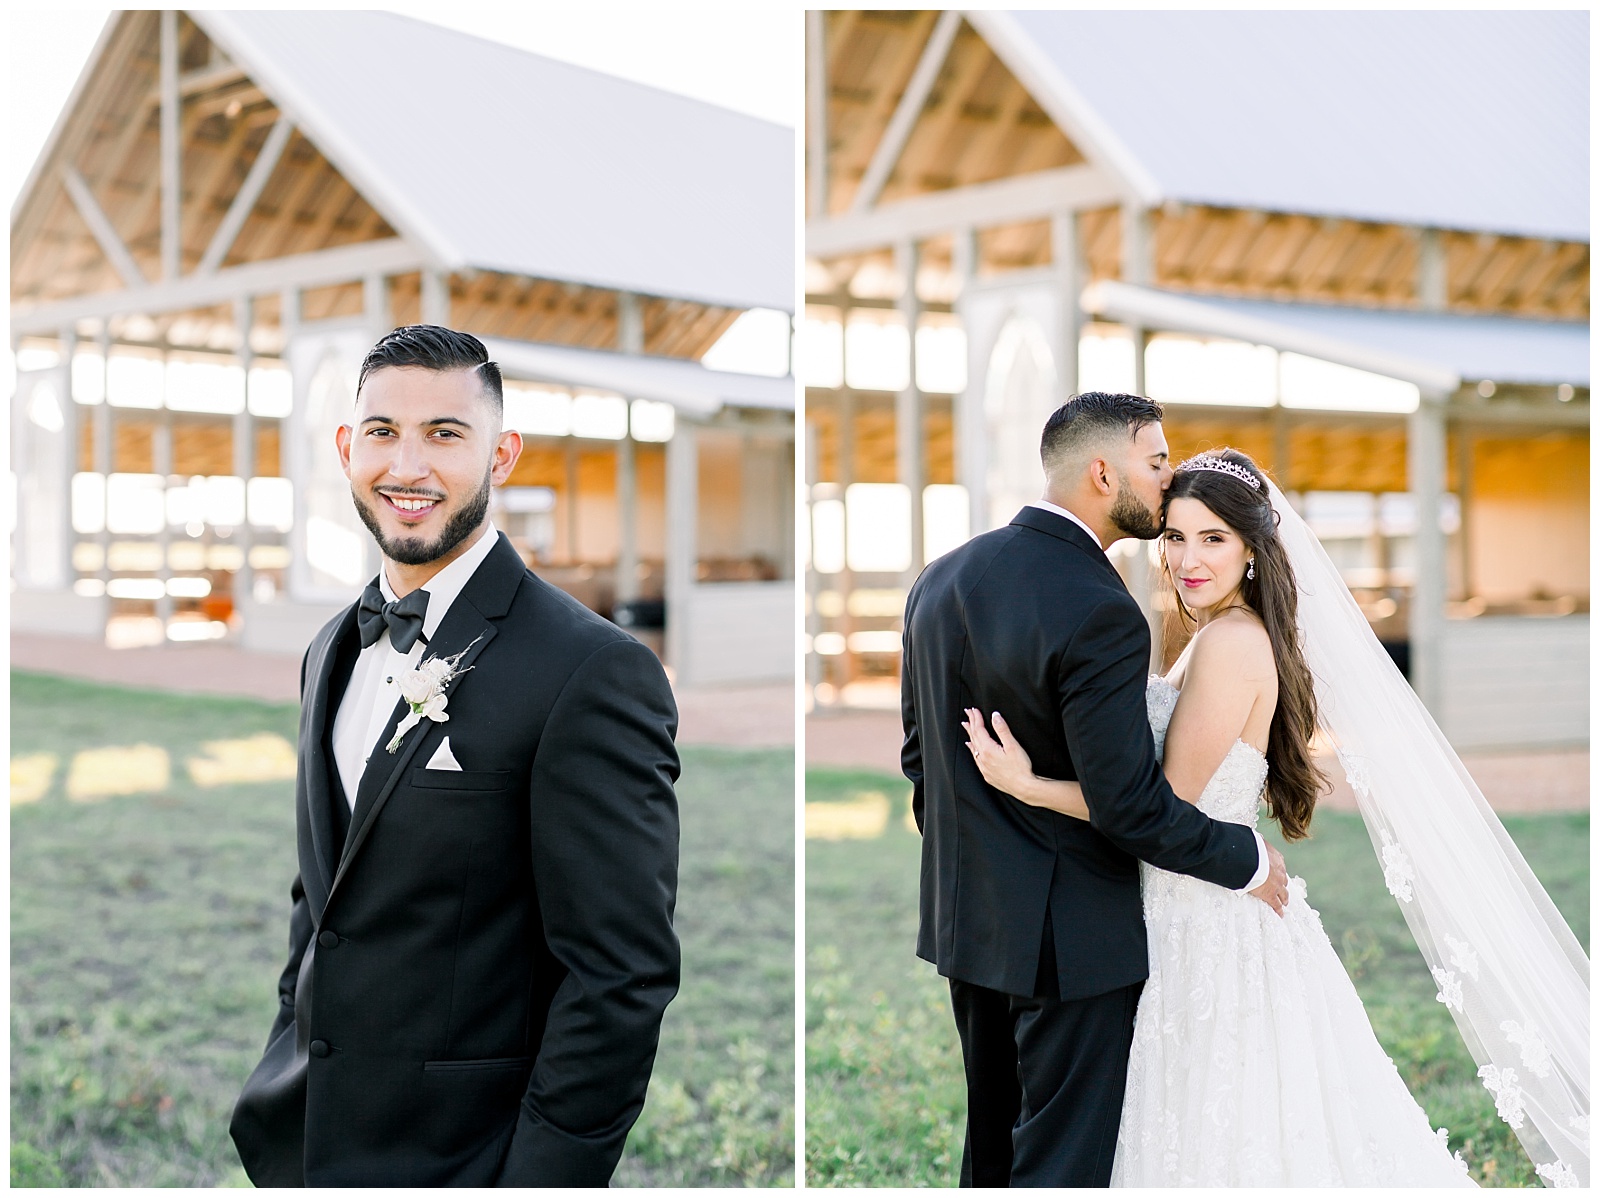 Side by side of groom and groom with his bride for a Romantic Wedding at The Allen Farmhaus in New Braunfels, TX | San Antonio-Maui-Destination Wedding Photographer | Monica Roberts Photography | www.monicaroberts.com